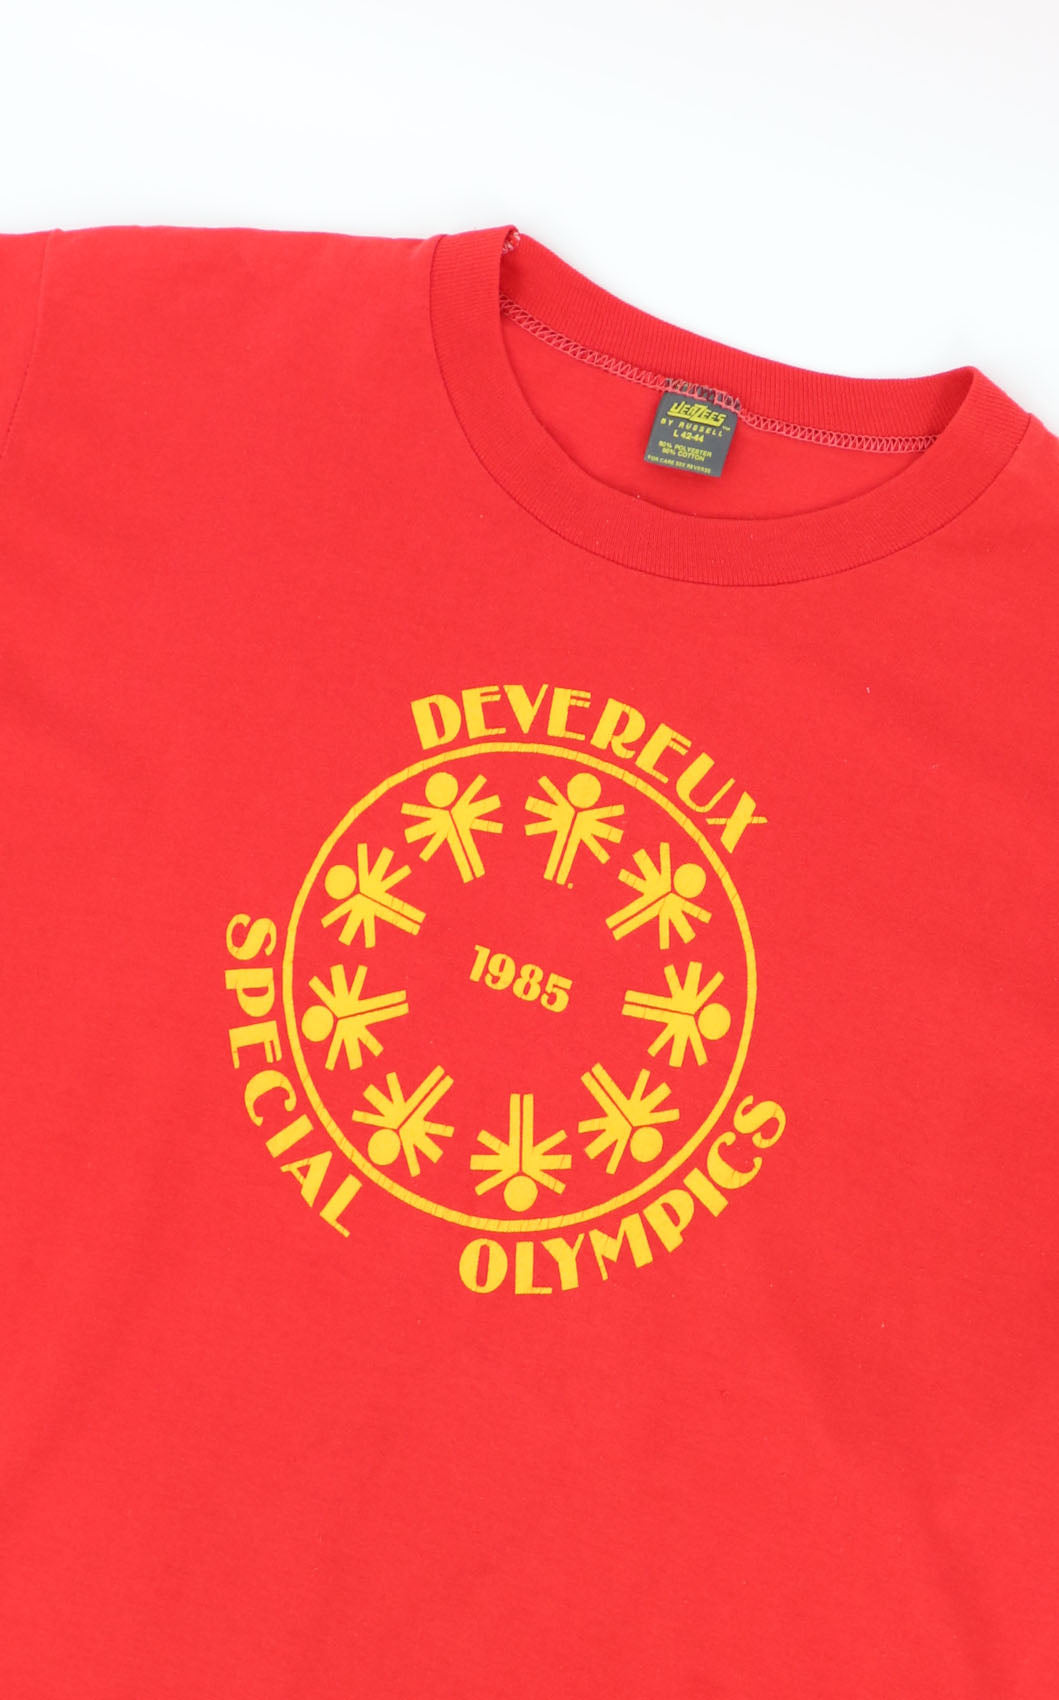 SPECIAL OLYMPICS 1985 MADE IN USA